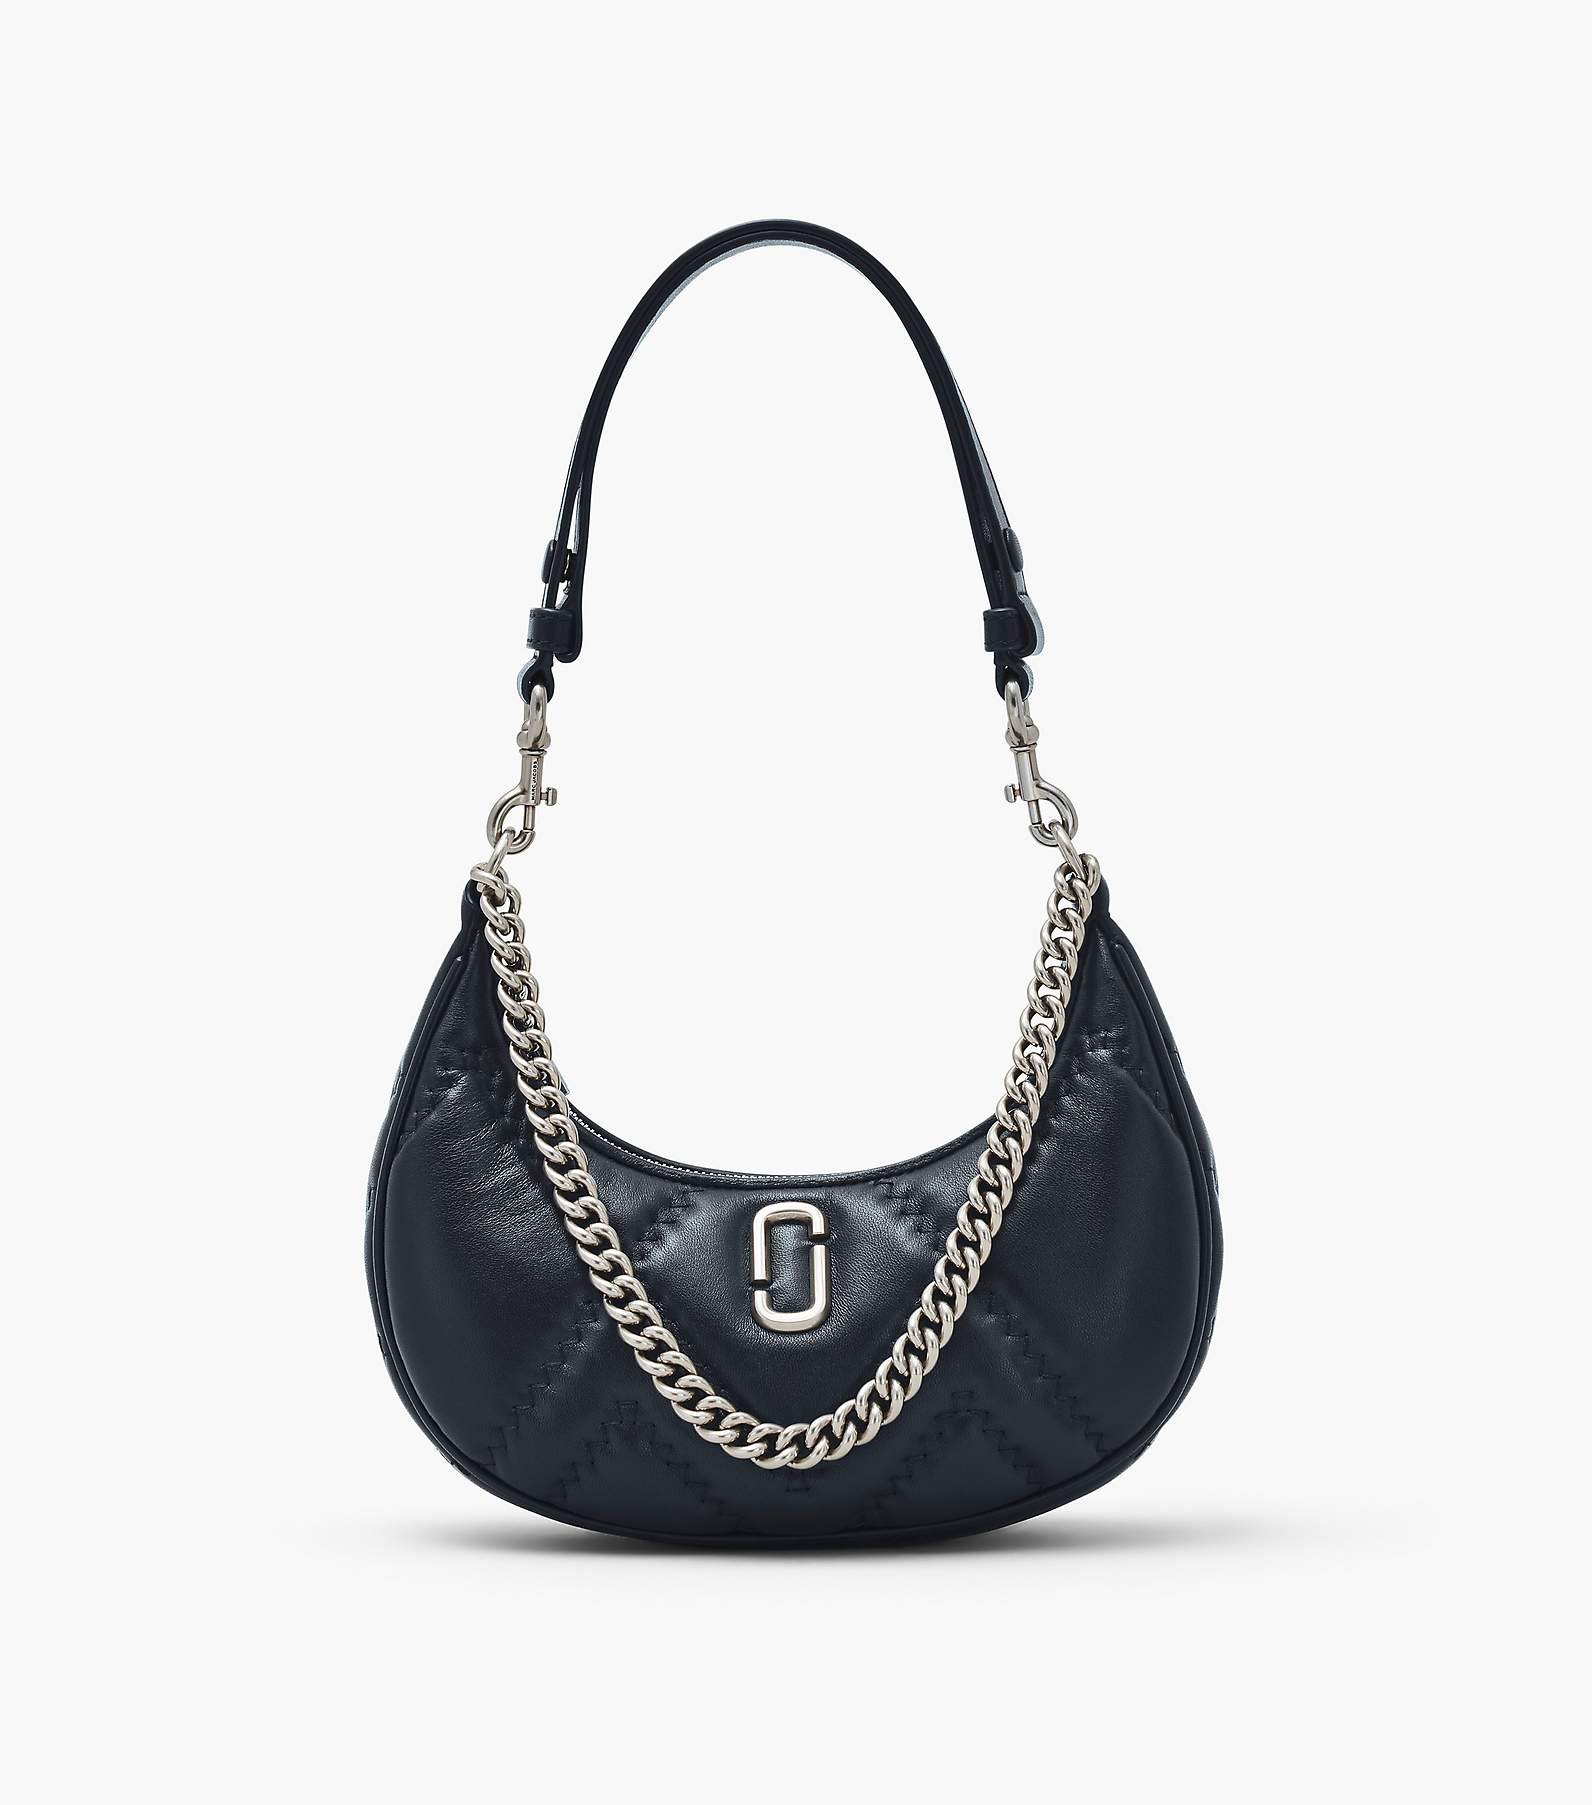 The Quilted Leather Curve Bag in Black